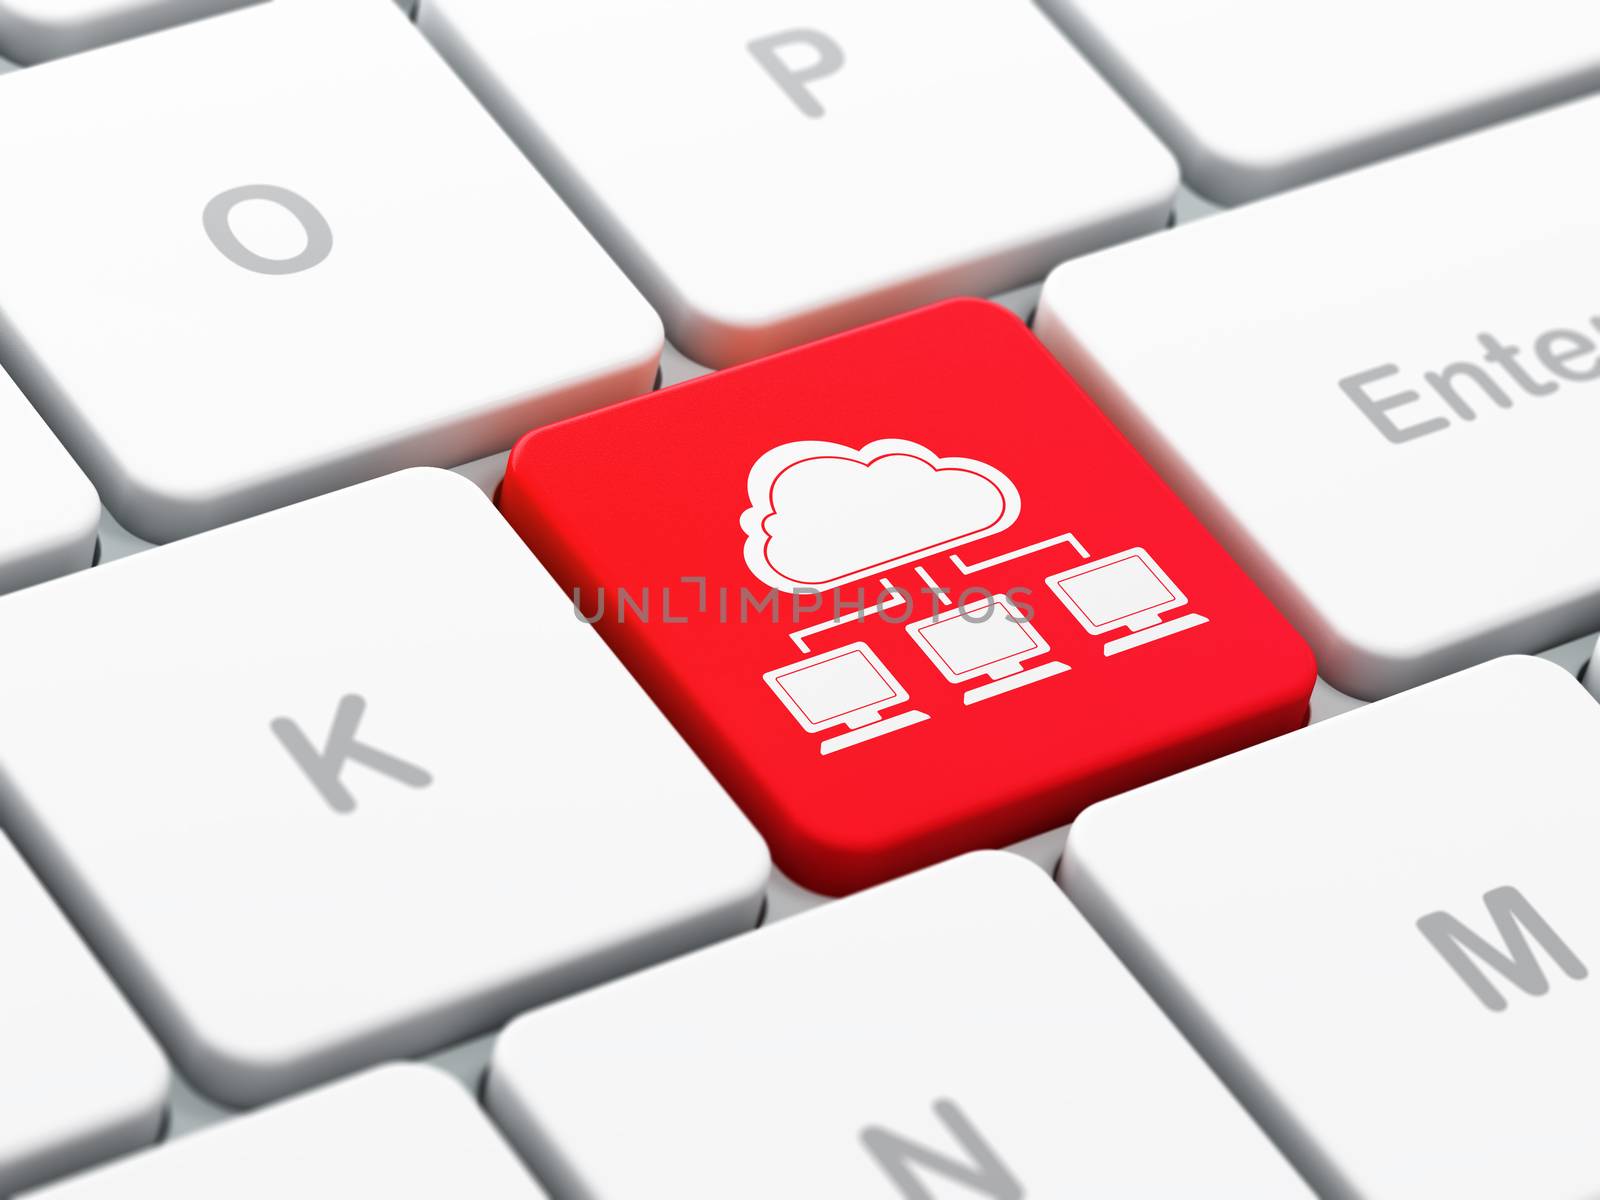 Cloud networking concept: computer keyboard with Cloud Network icon on enter button background, selected focus, 3d render